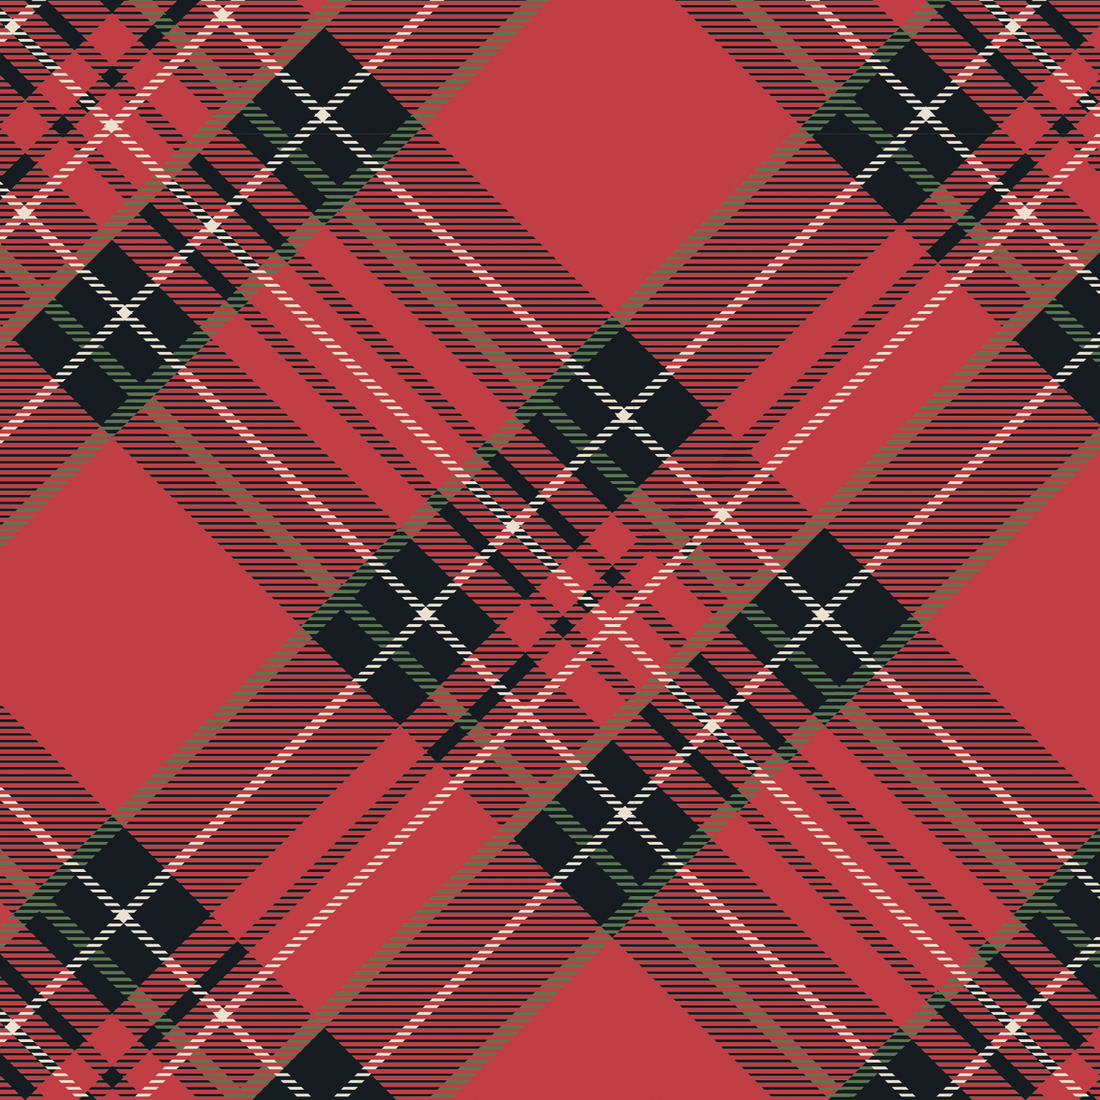 A square cocktail napkin featuring a diagonal plaid pattern of black, white, gold and green over bright red.